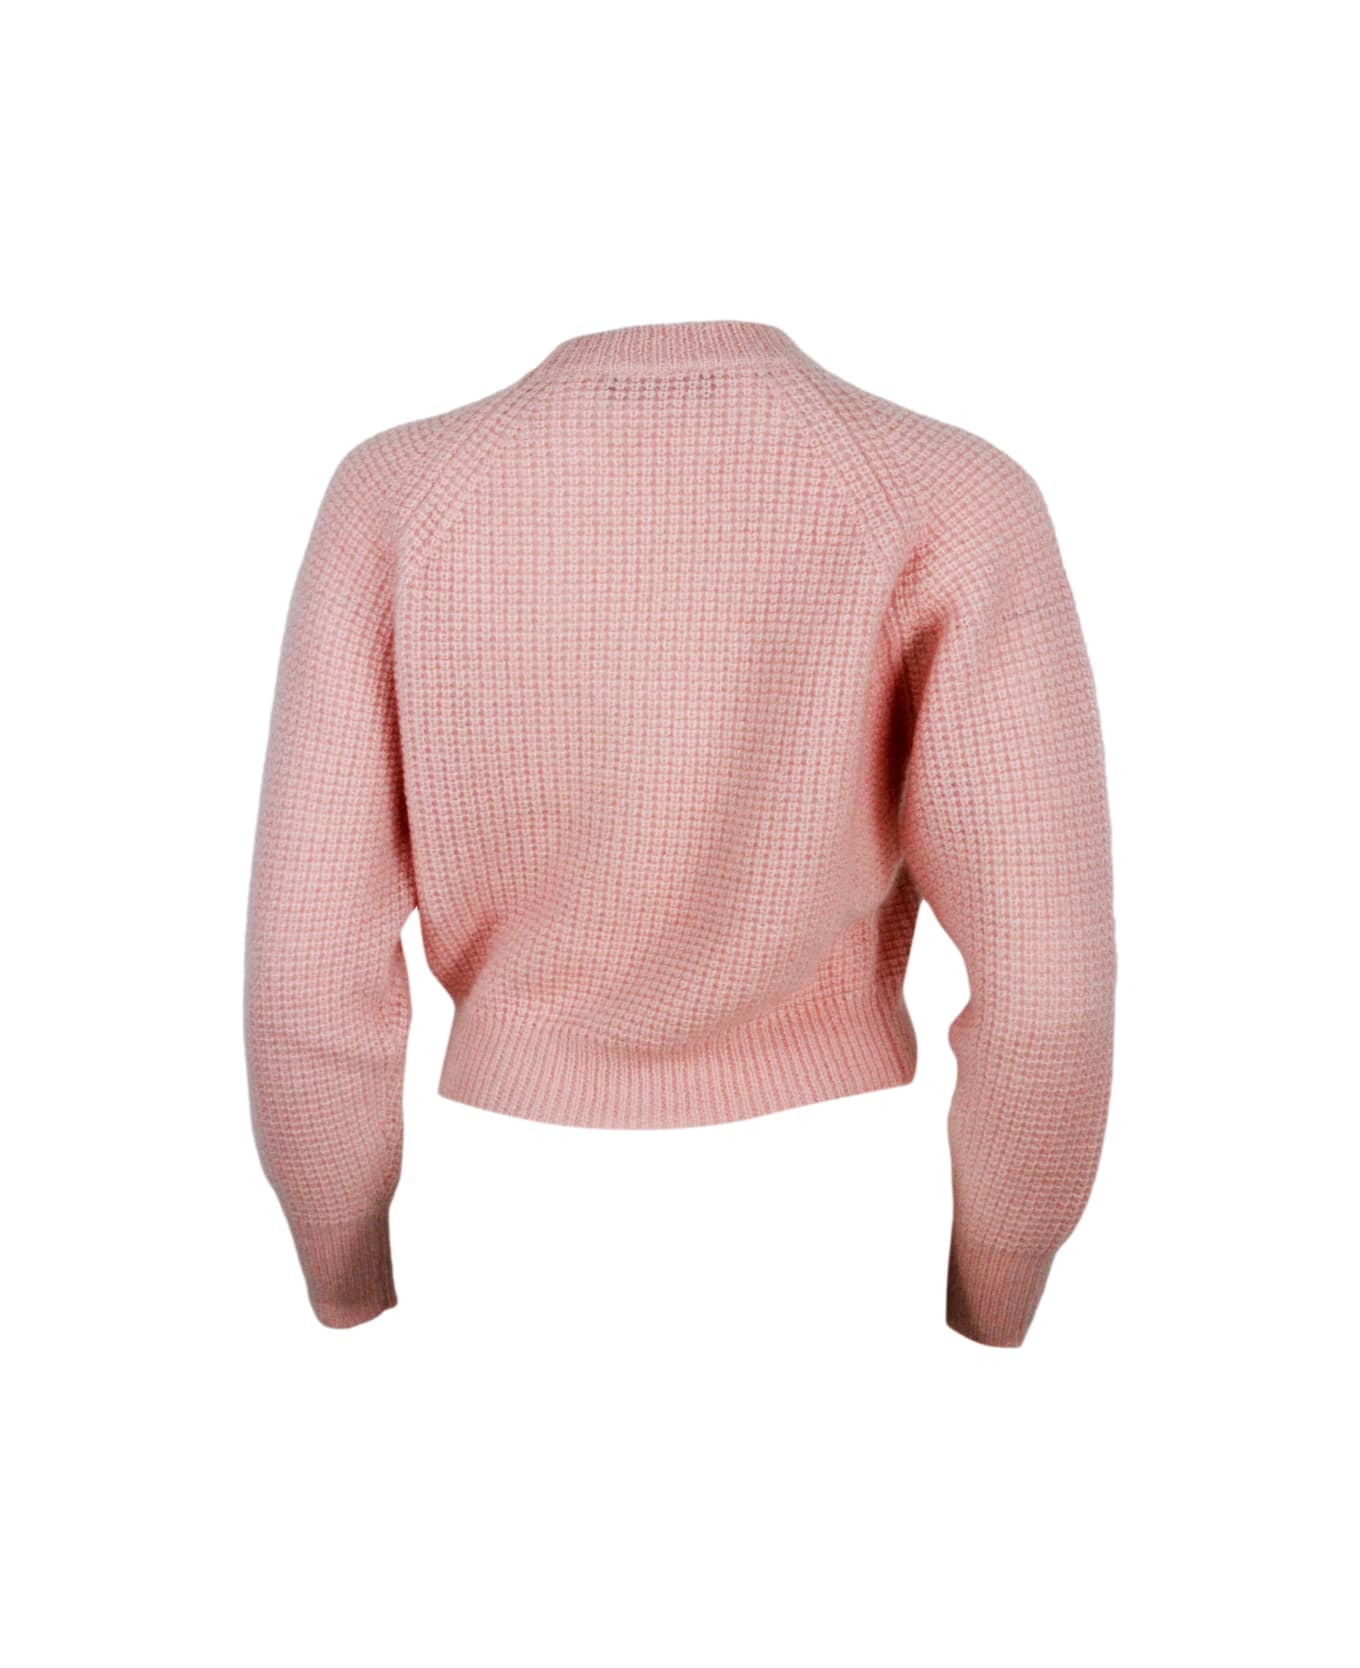 Fabiana Filippi Long-sleeved Crew-neck Sweater In Mohair, Cropped Model With Raglan Sleeves And Diamond Stitch Work - Pink ニットウェア